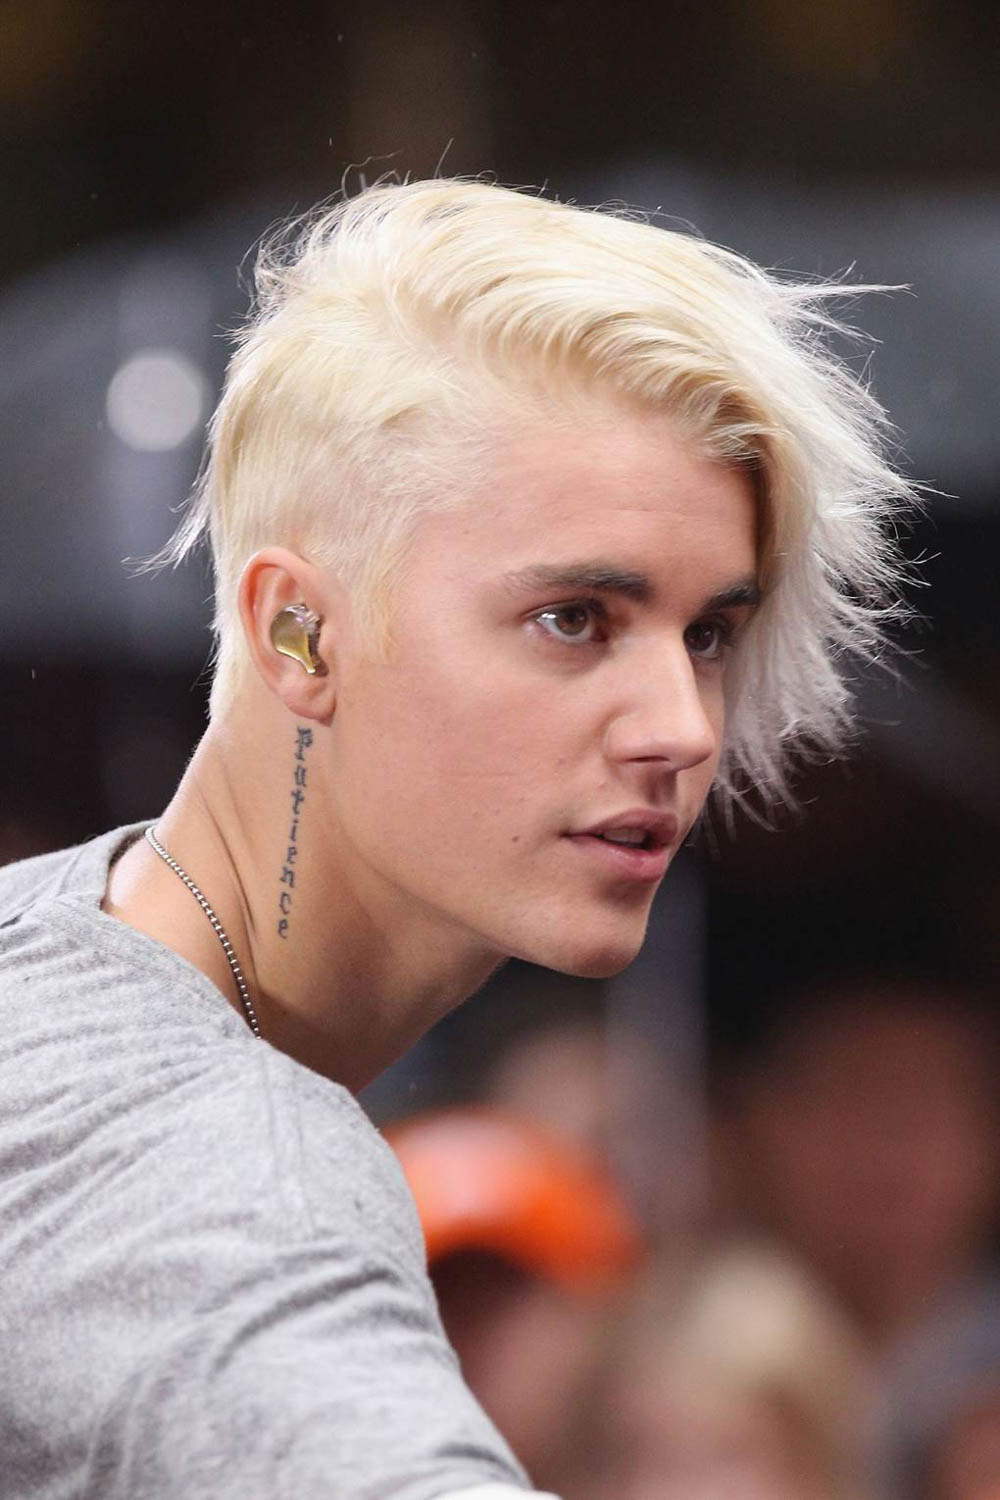 Justin Bieber shows off new buzzcut as he says goodbye to his locks   Mirror Online